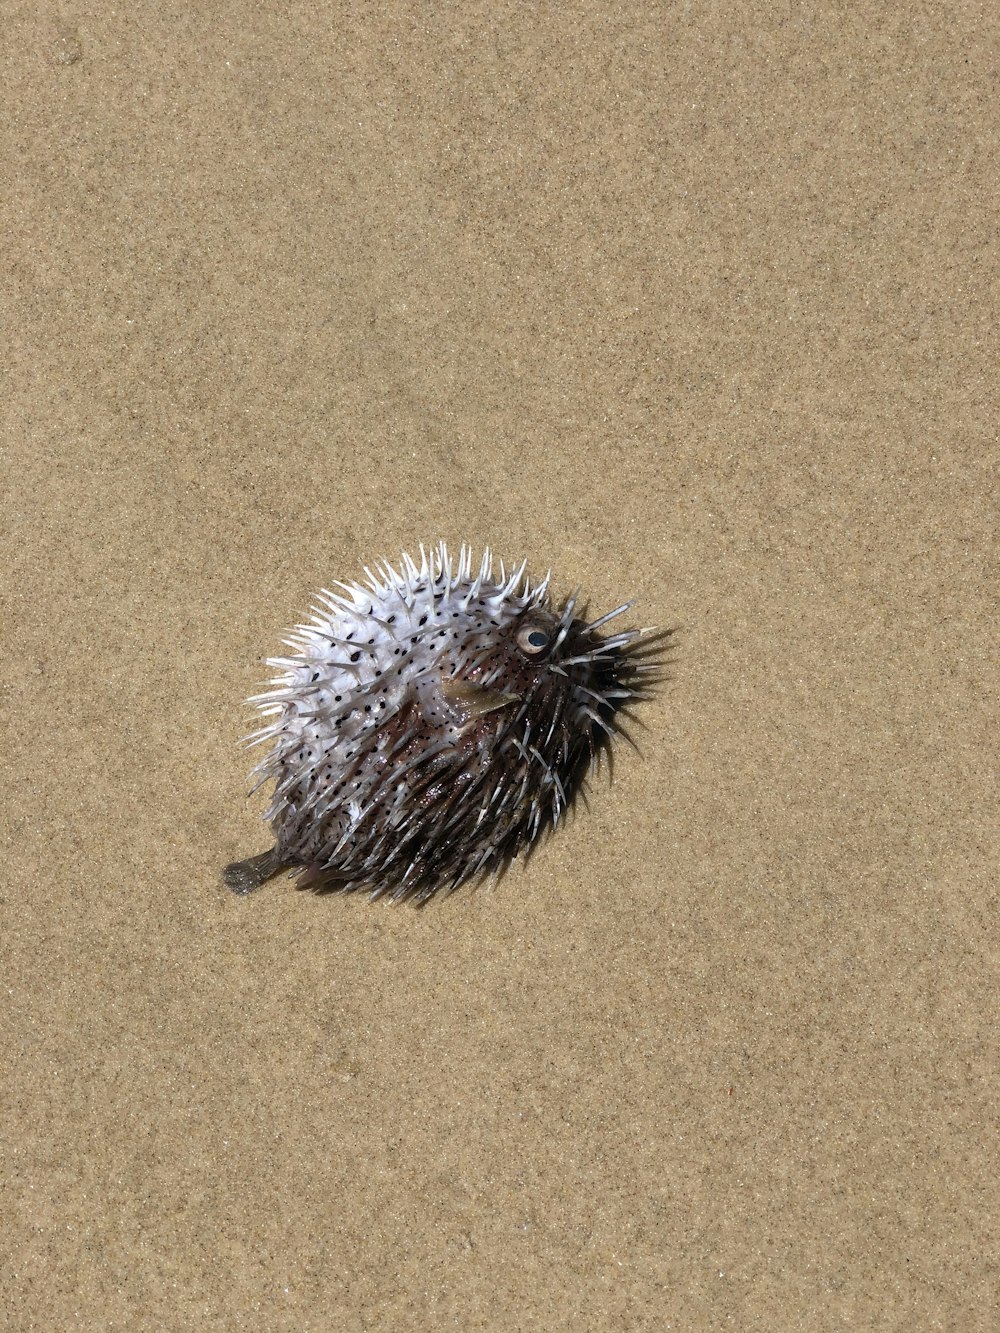 black and white hedgehog on brown sand